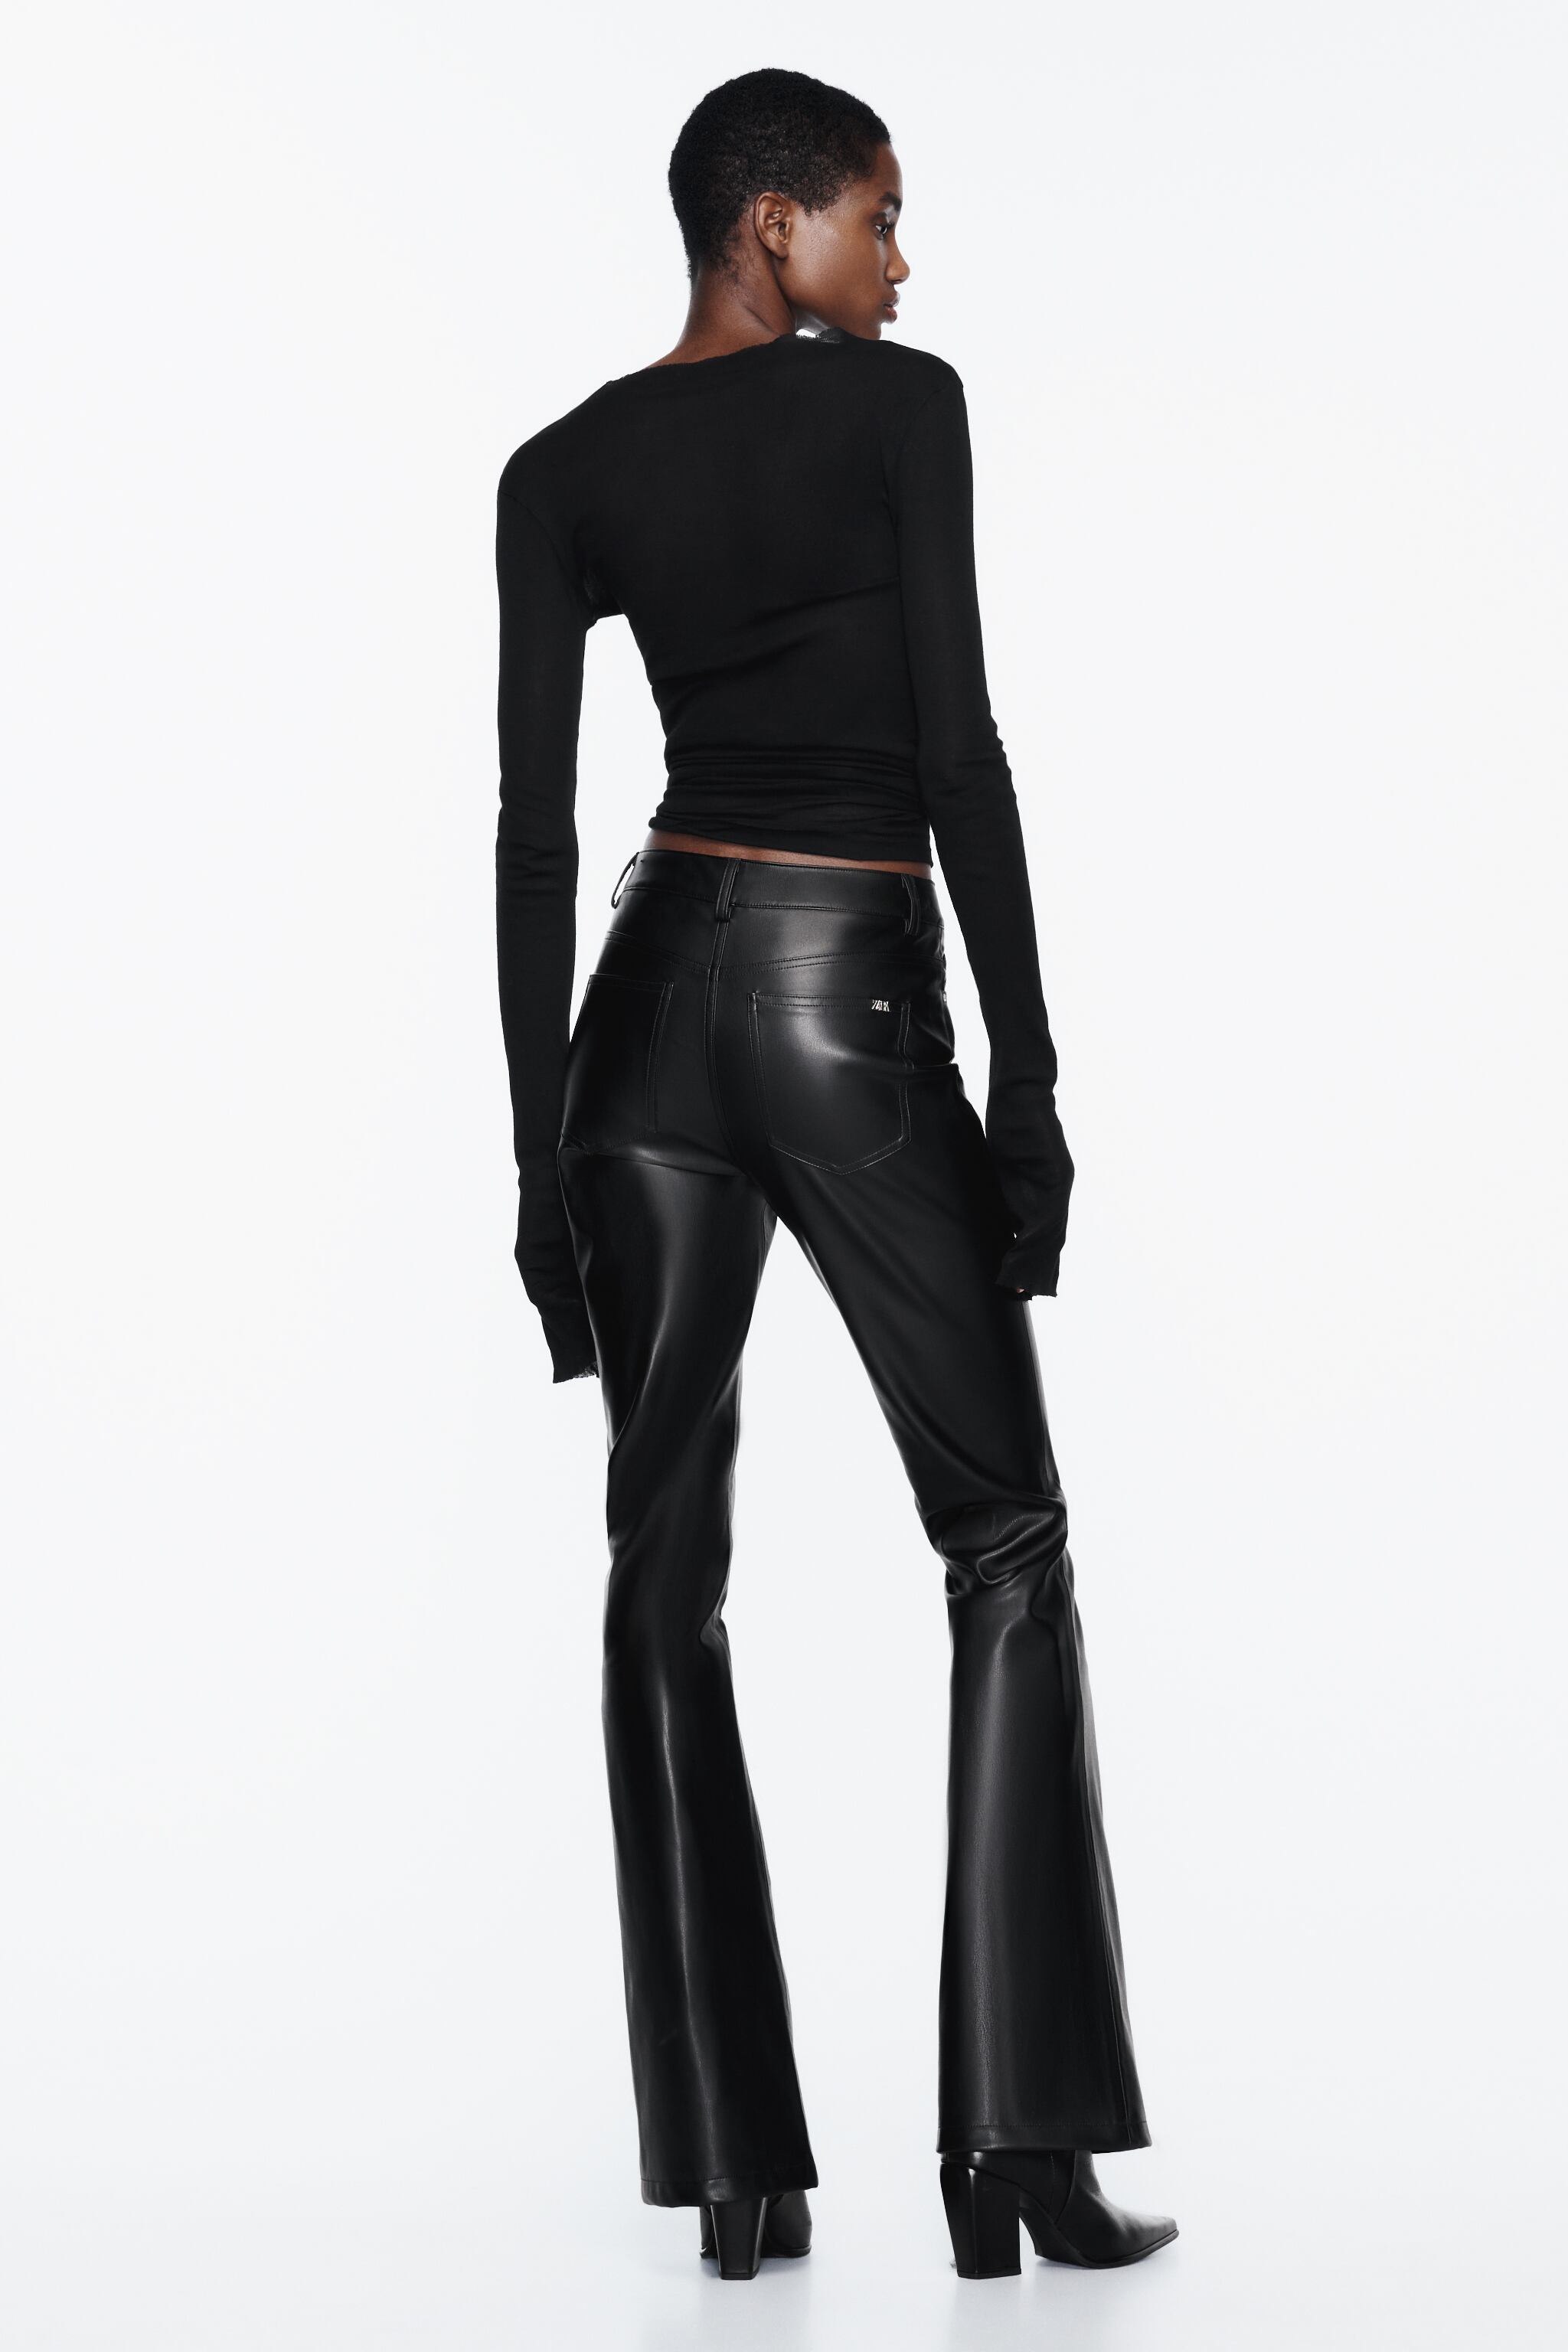 Zara FAUX LEATHER FLARED PANTS